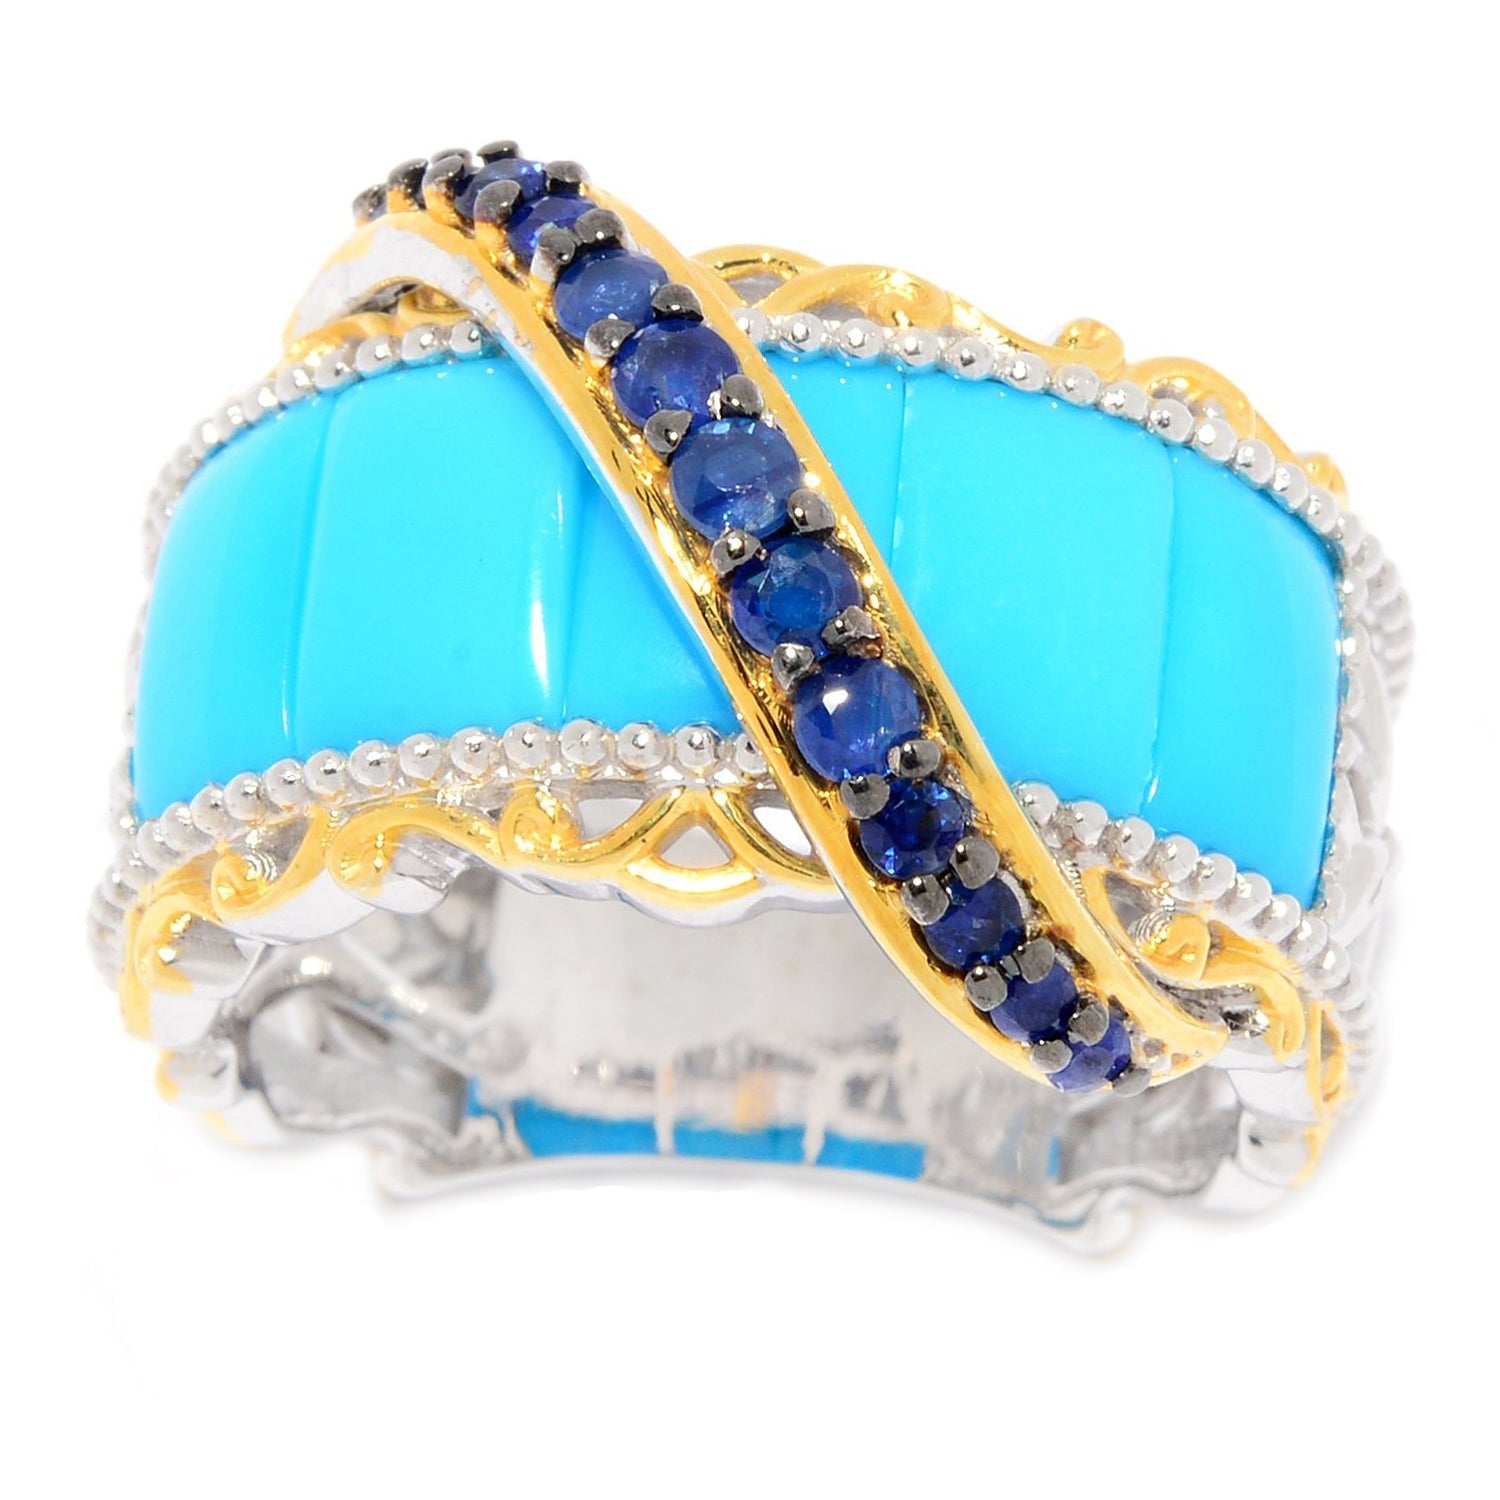 Gems en Vogue Sleeping Beauty Turquoise & Precious Gemstone Highway Ring CANNOT BE RESIZED